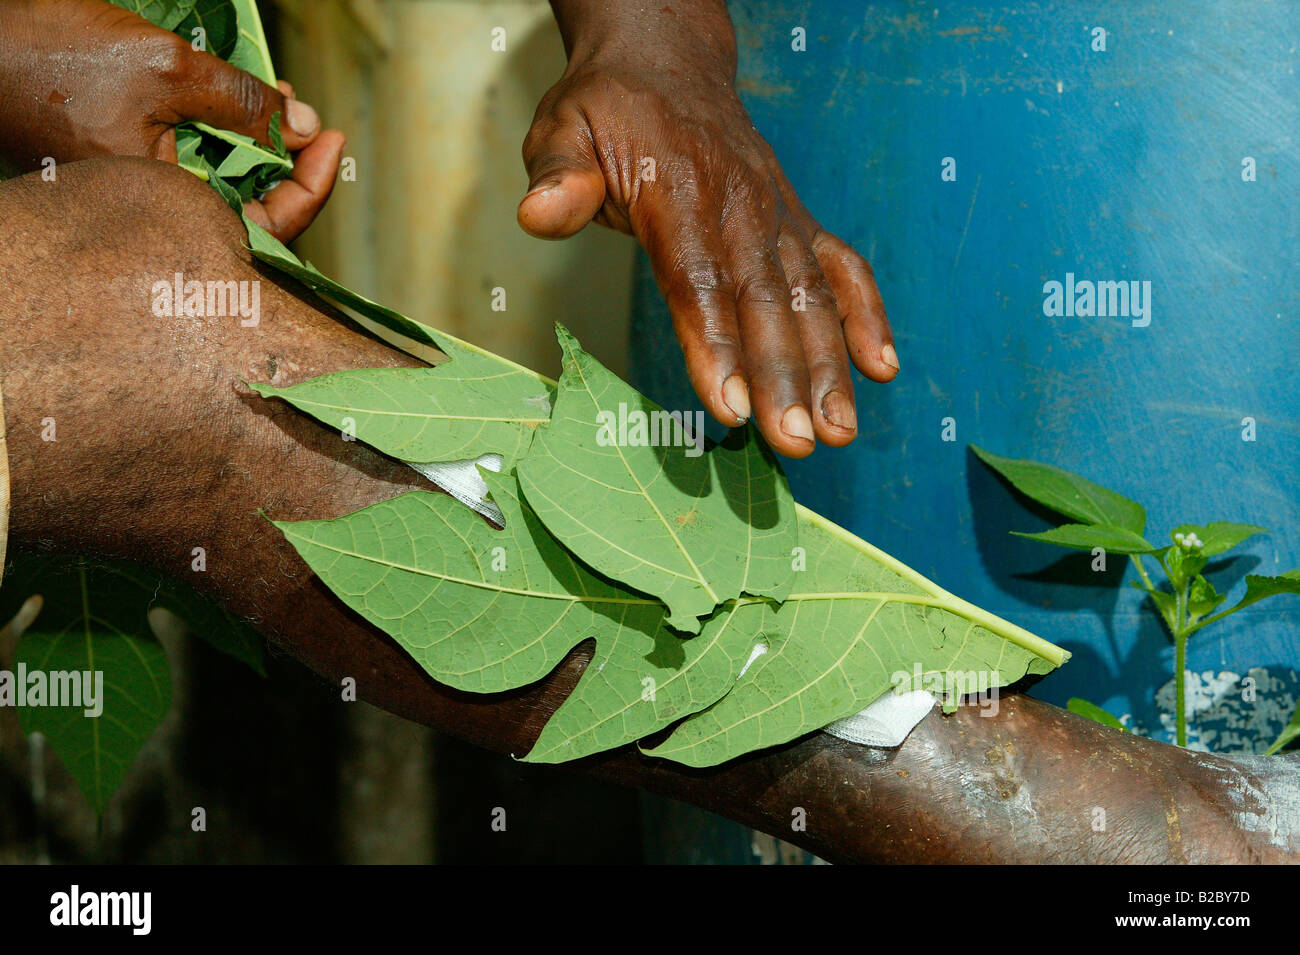 A natural healer treating the bad leg of a patient, Yaounde, Cameroon, Africa Stock Photo